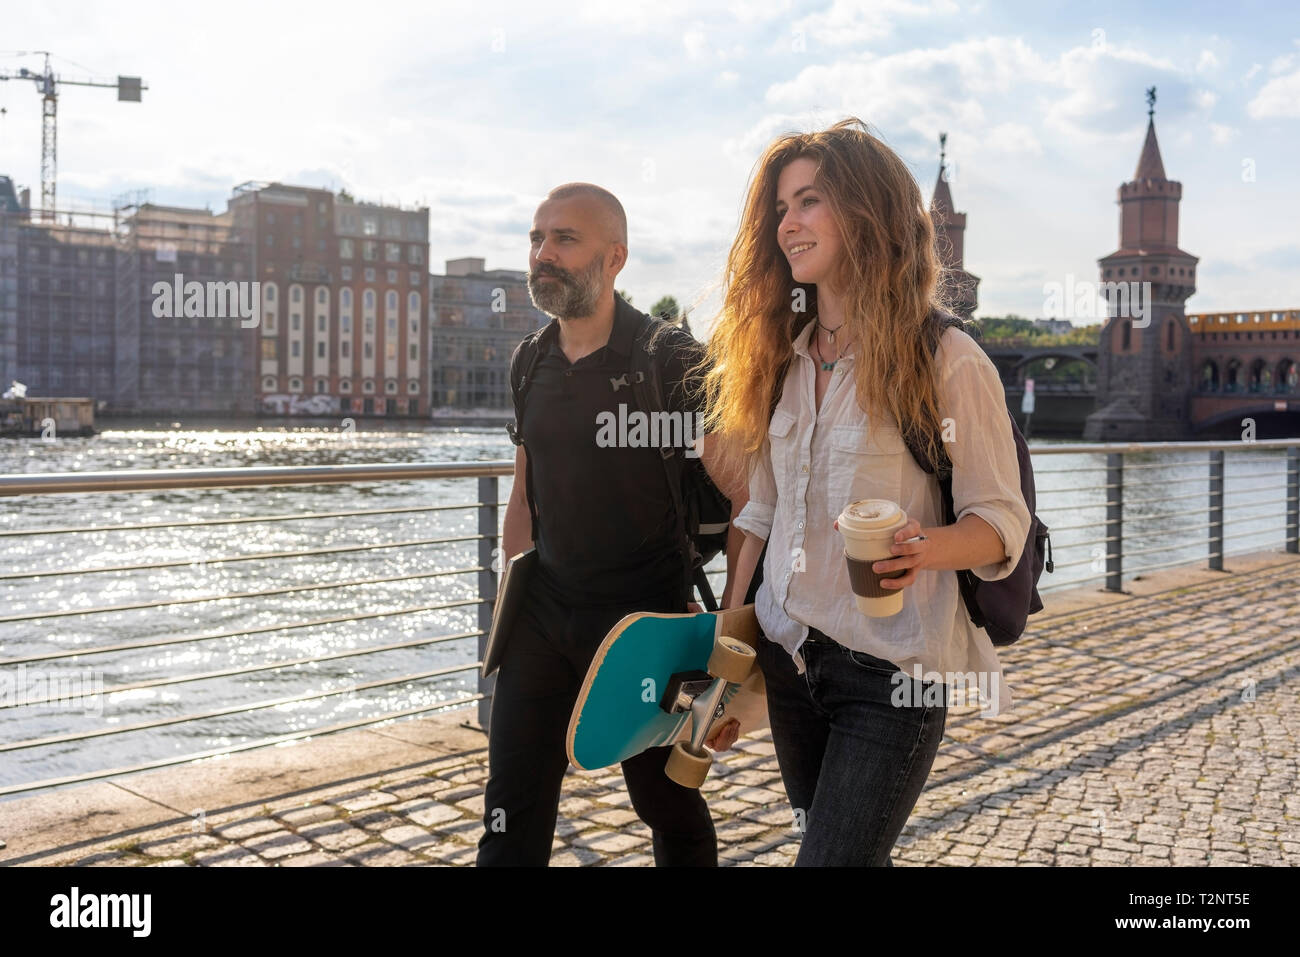 Man and female friend with skateboard on bridge, river, Oberbaum bridge and buildings in background, Berlin, Germany Stock Photo